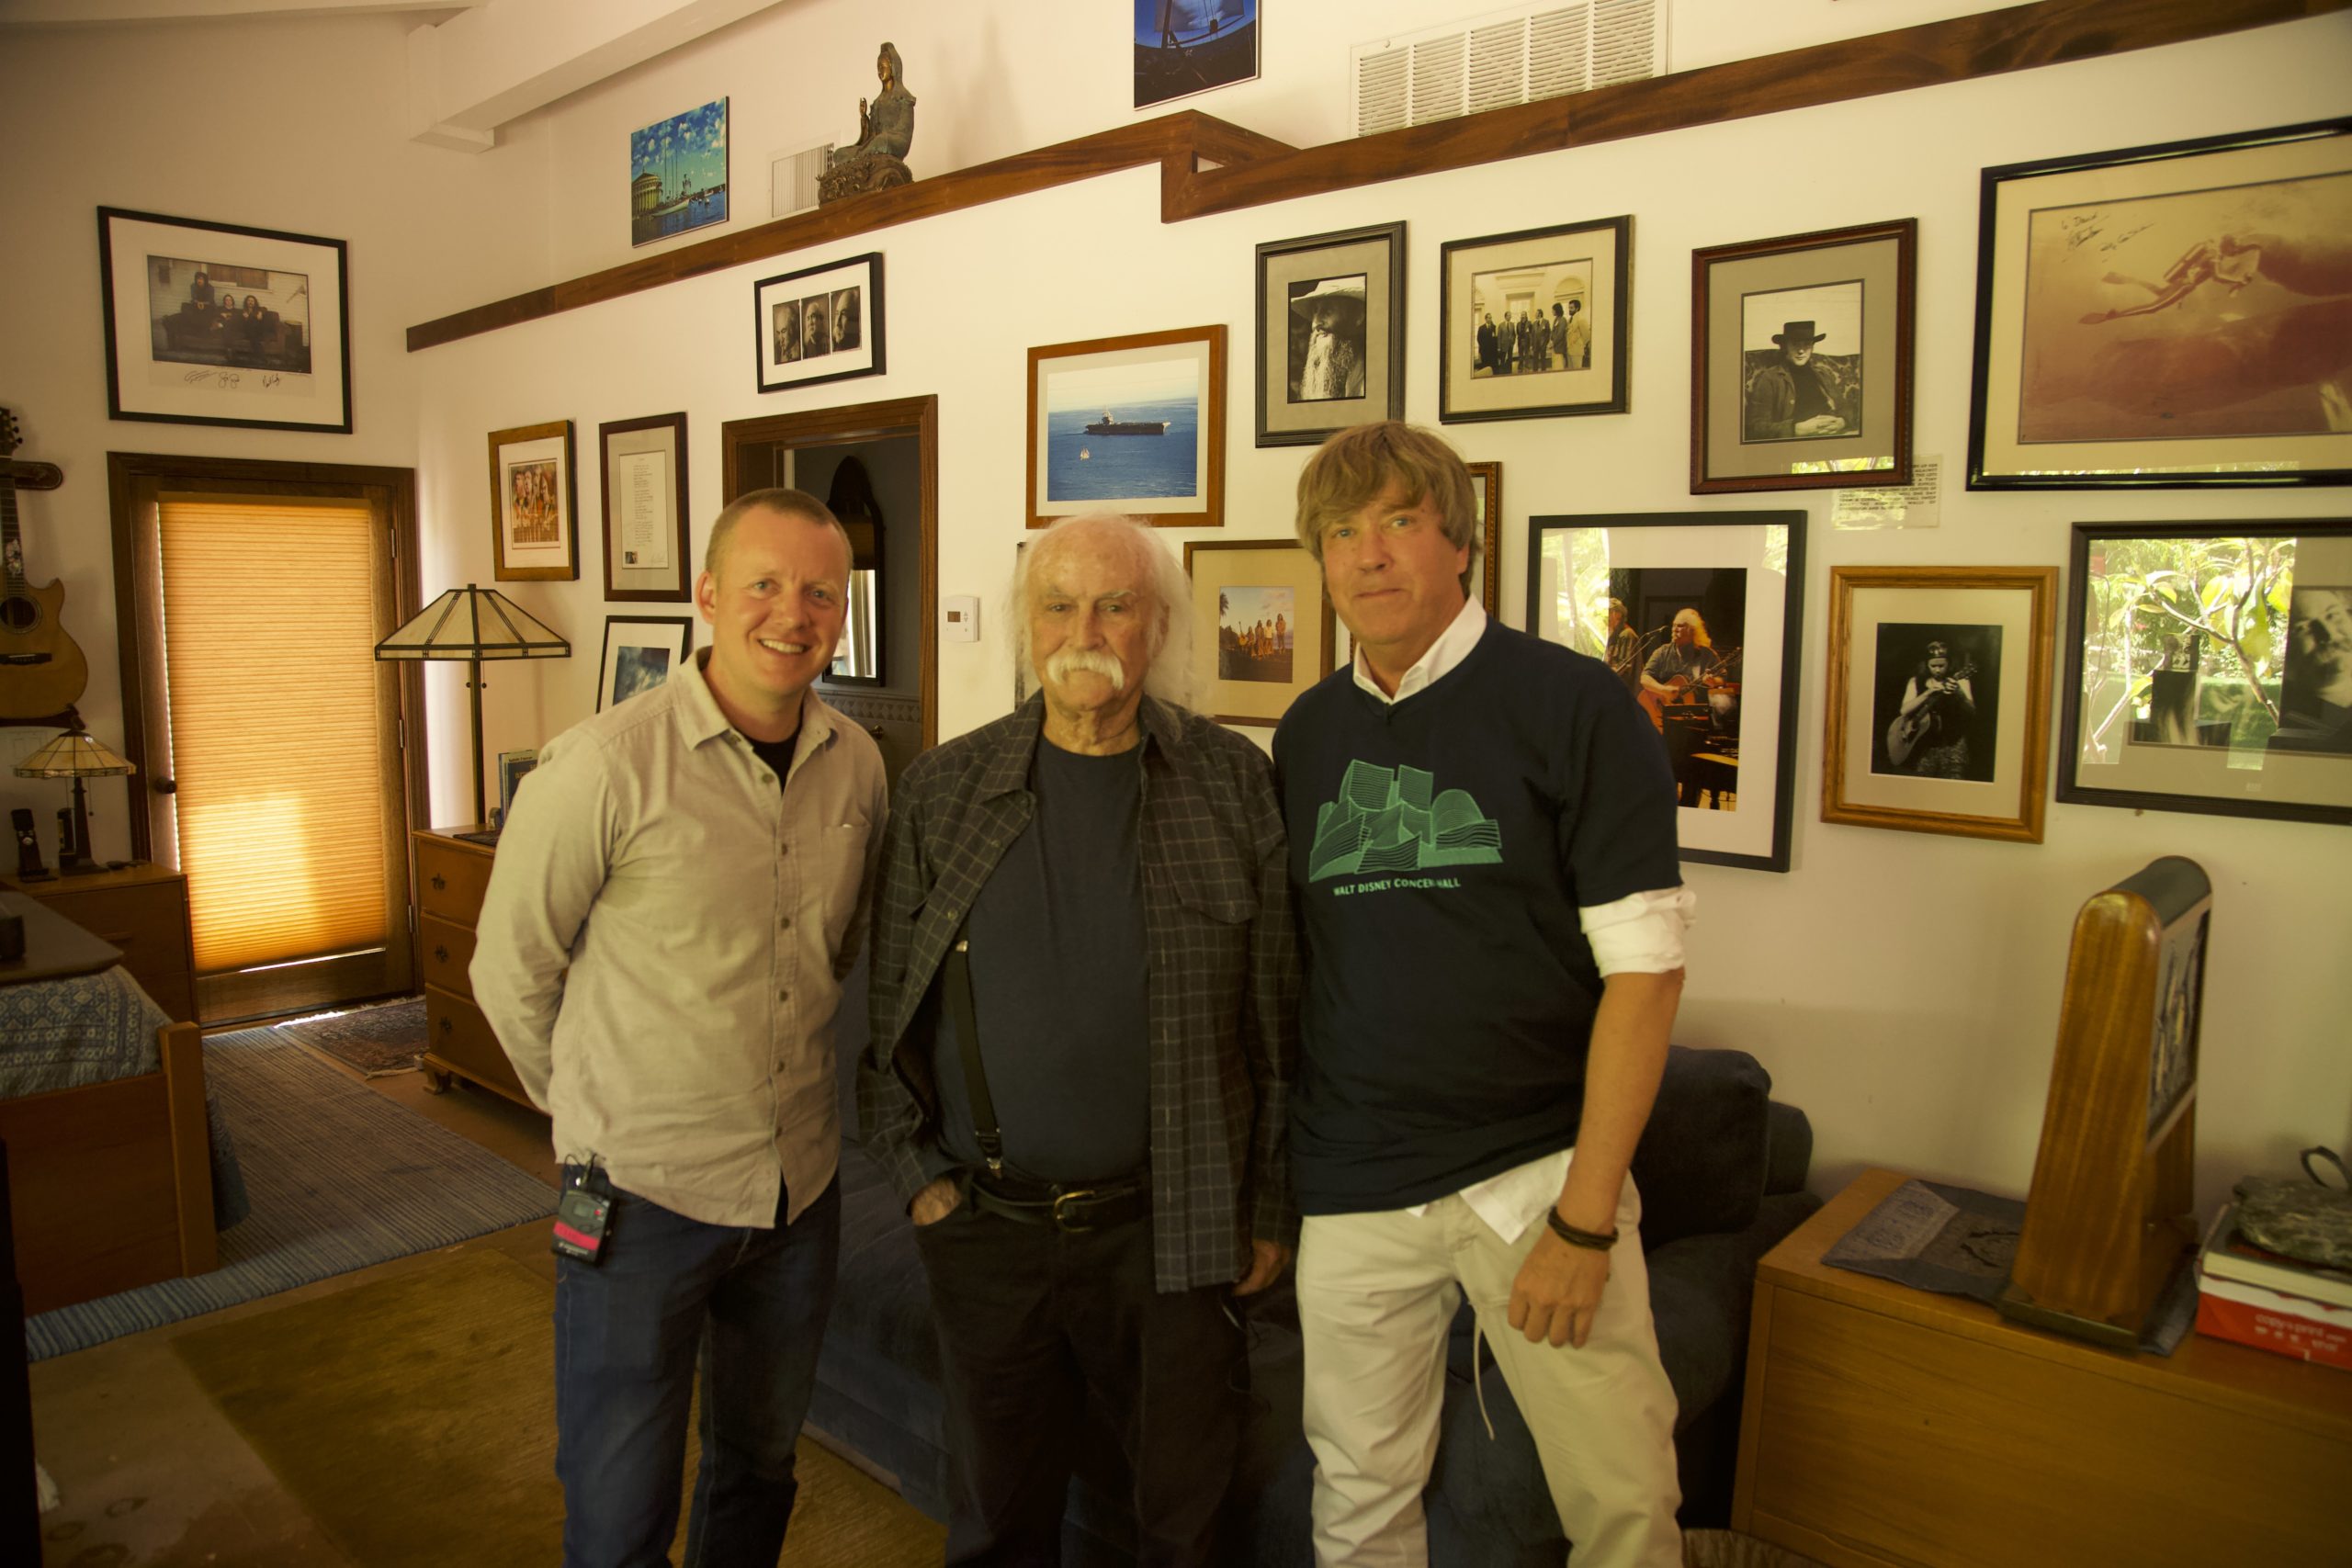 Mischa Hedges, Brendan Hedges and David Crosby pose for a photograph